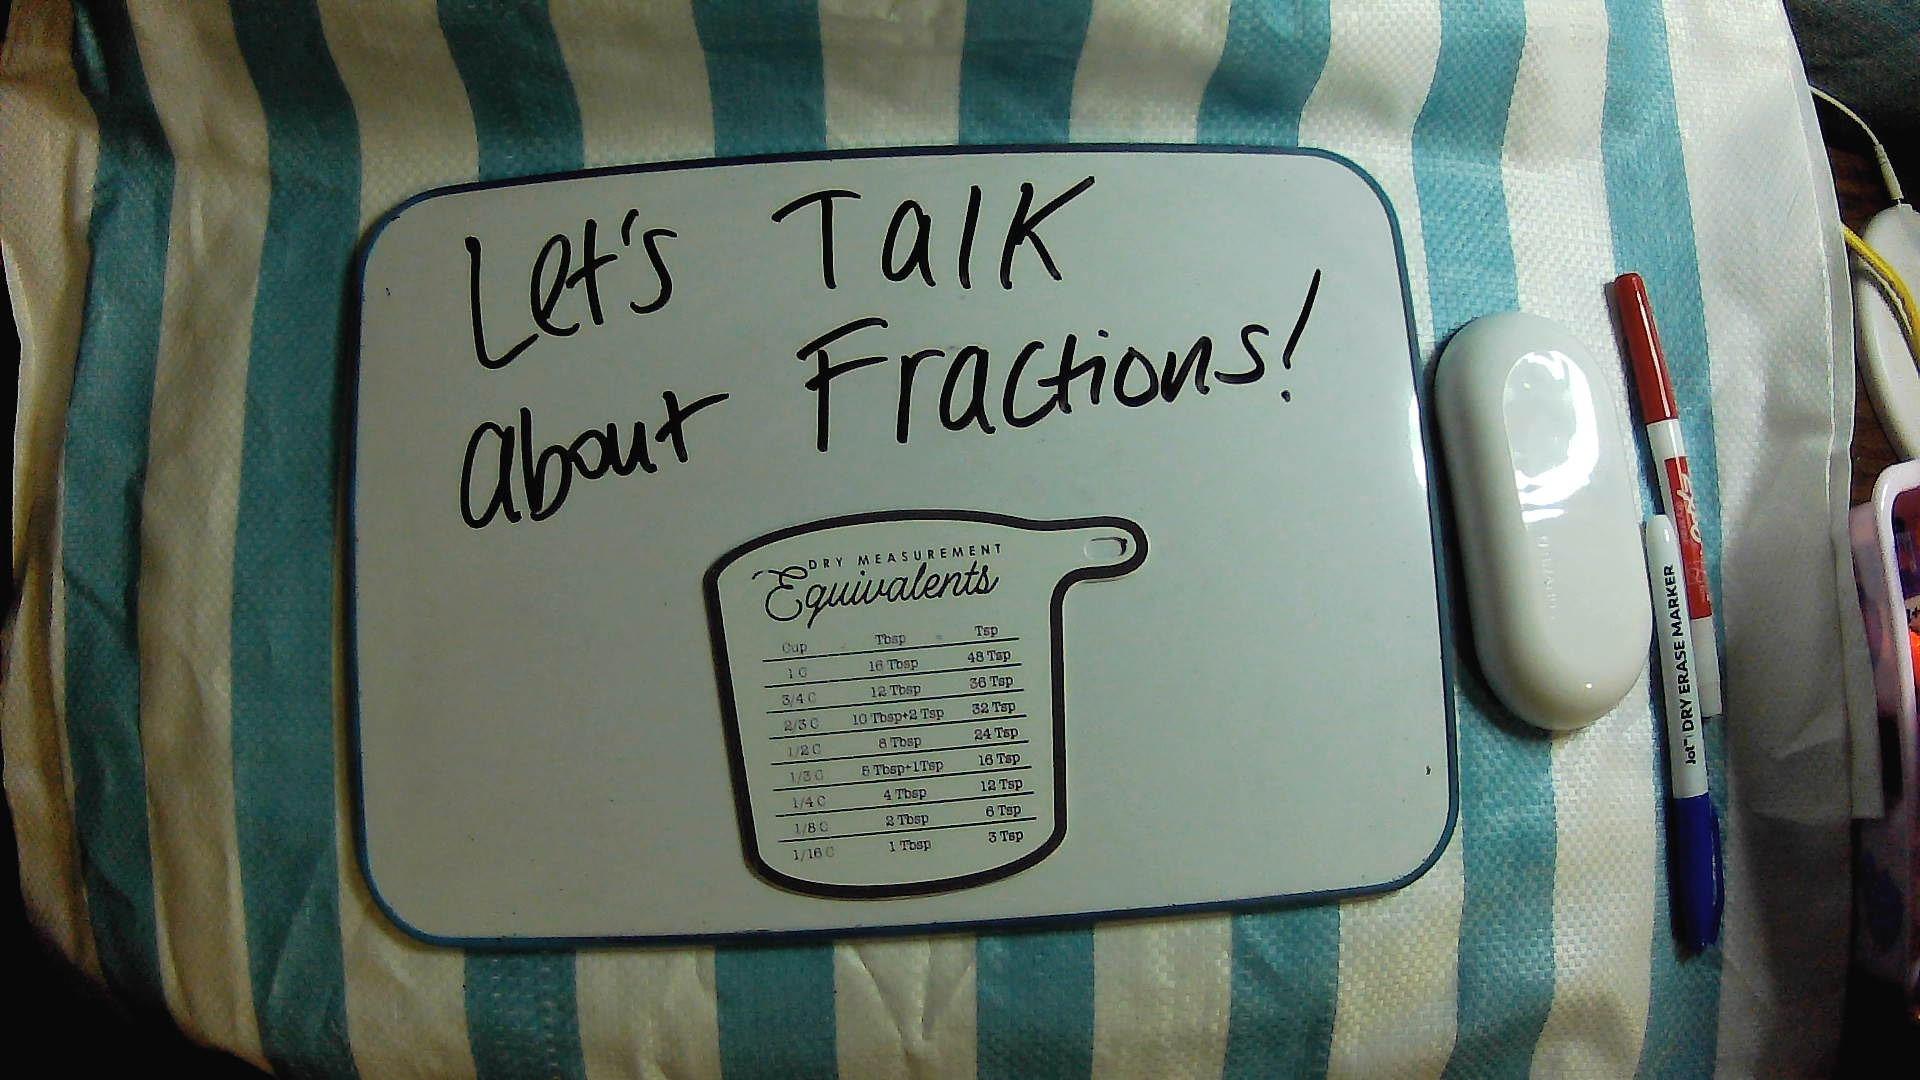 Let's talk about FRACTIONS!